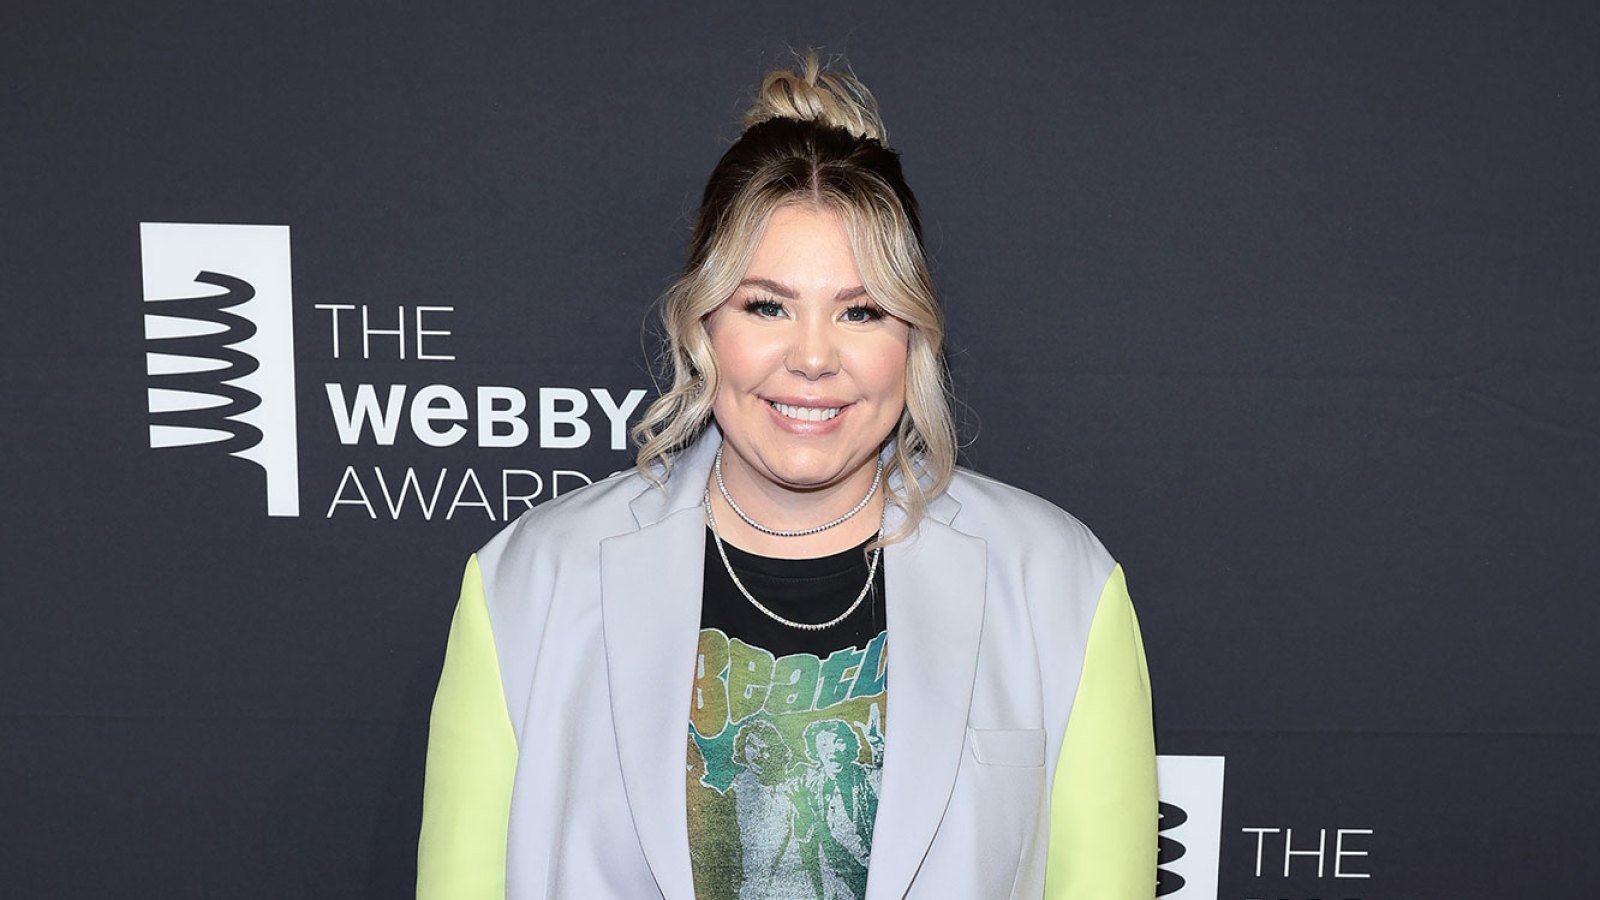 Teen Mom 2 Alum Kailyn Lowry Finally Opens Up About Birth of Baby 5 NICU Stay